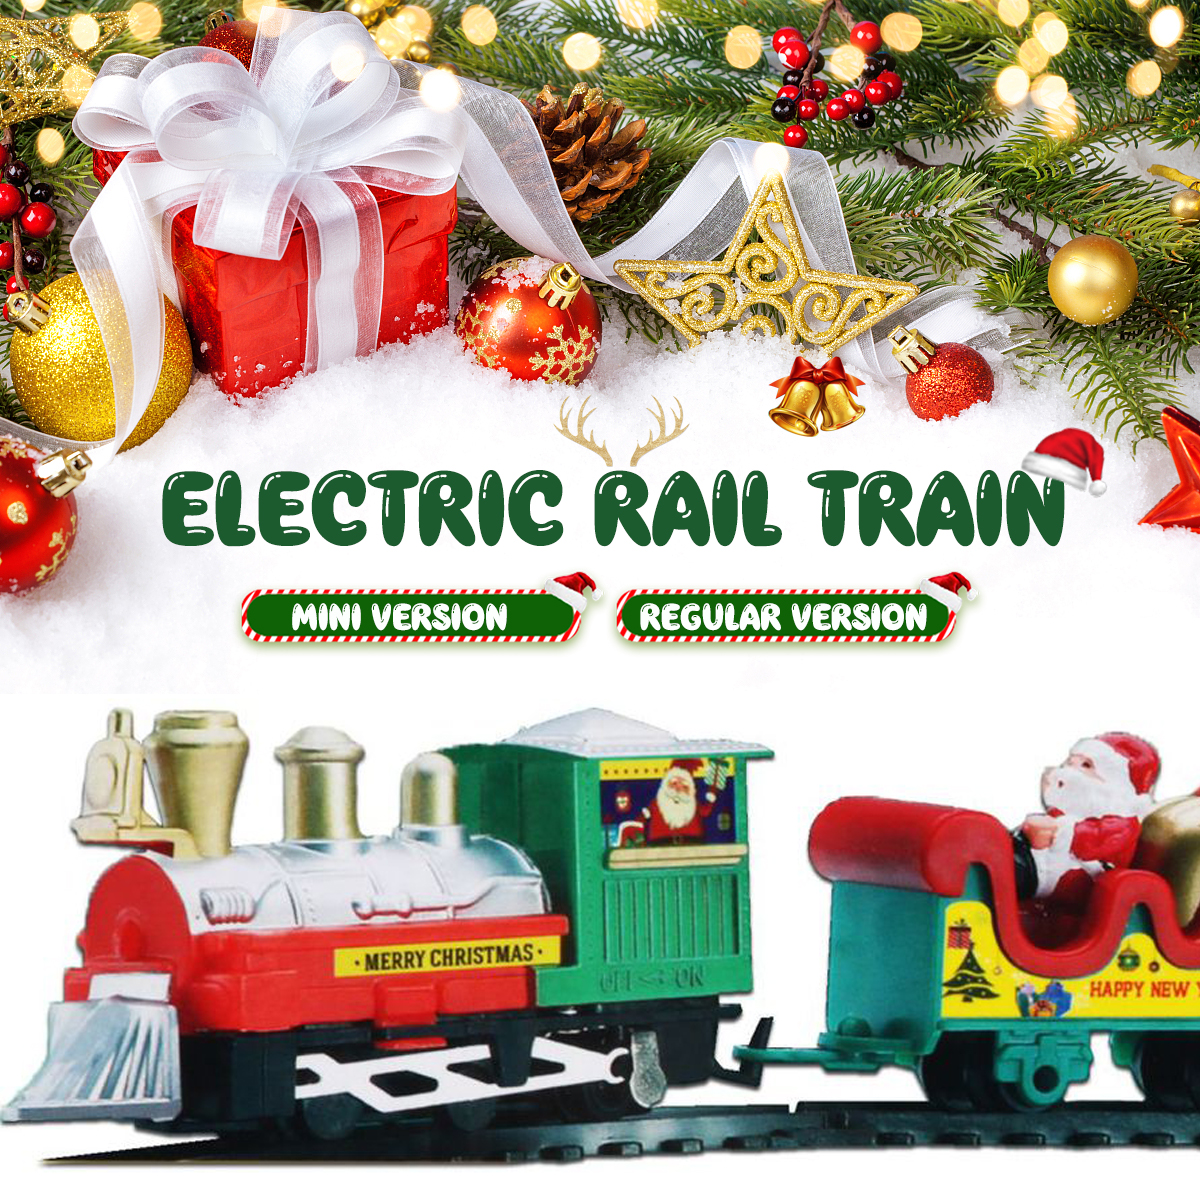 Mini-Electric-ABS-DIY-Assembly-Realistic-Front-Rail-Train-Track-Play-Fun-Model-Toy-for-Kids-Christma-1766568-1